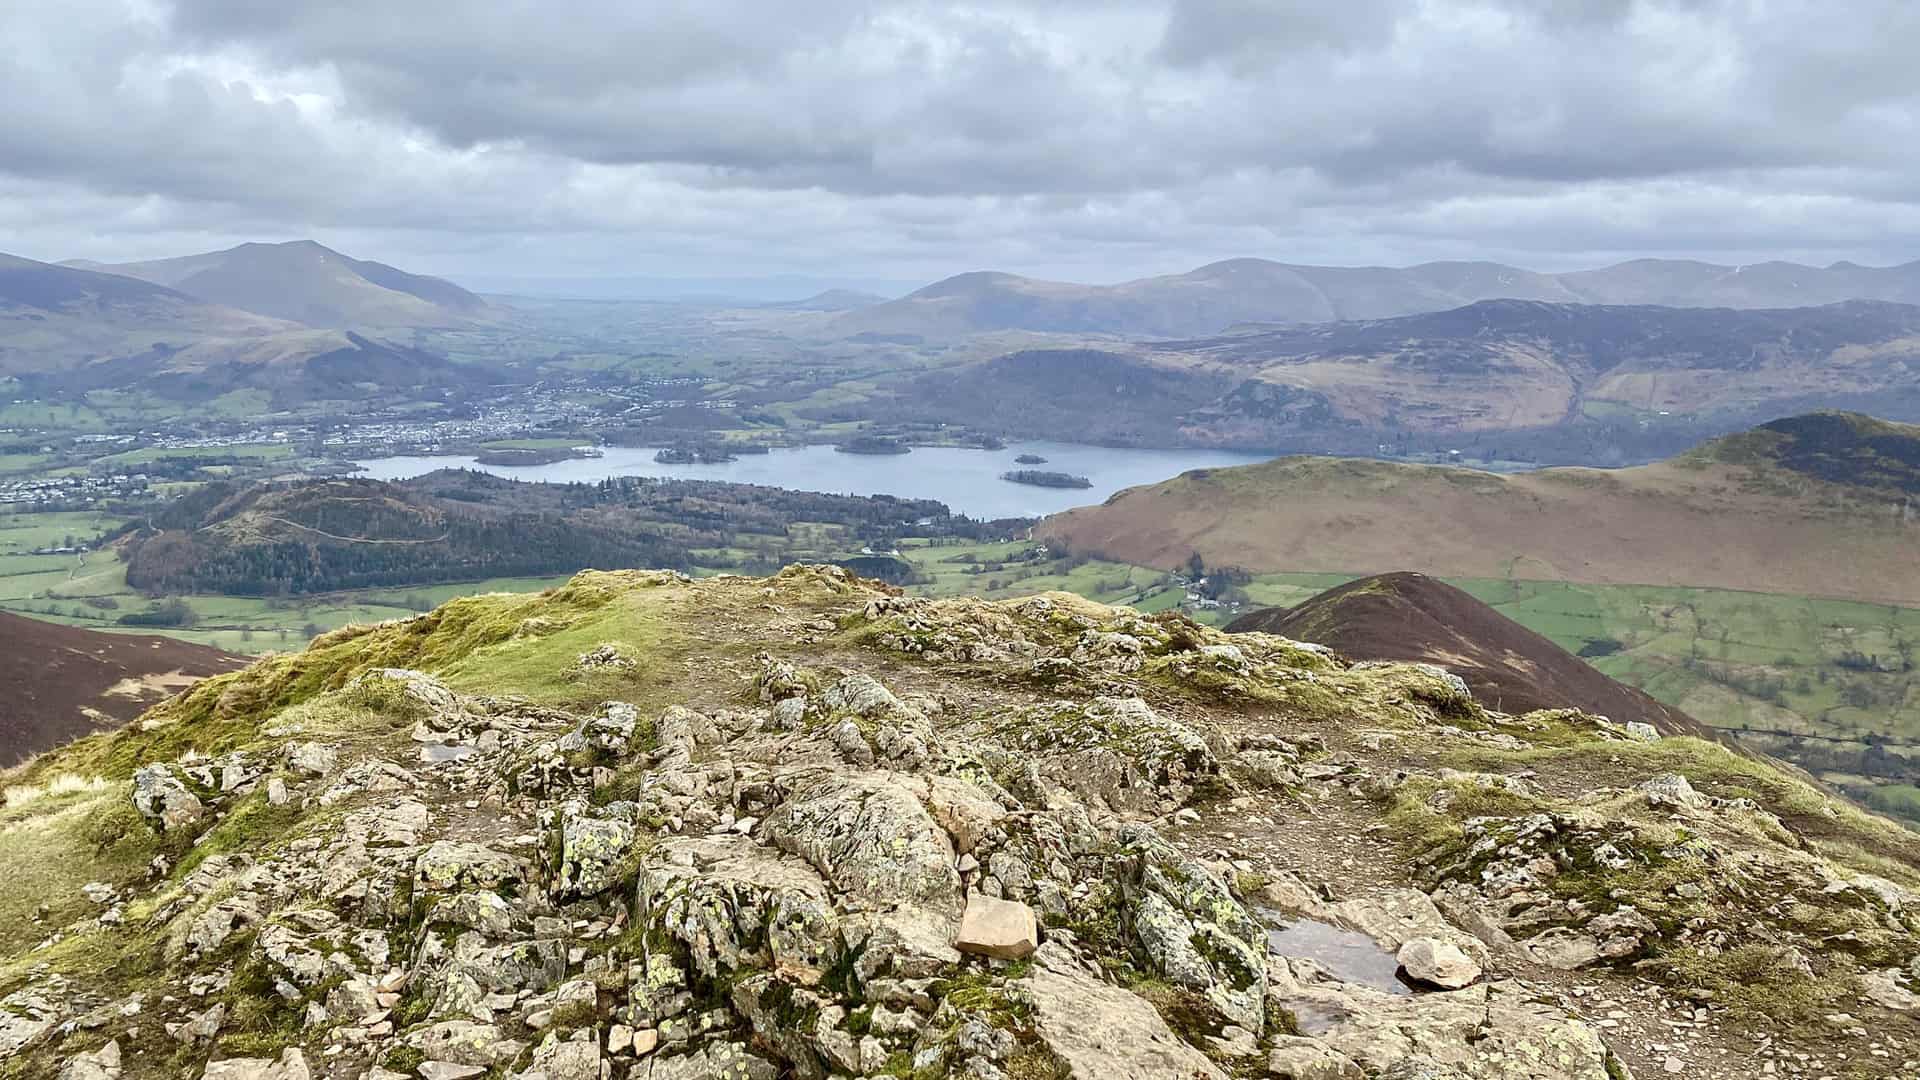 Derwent Water and Keswick as seen from the summit of Causey Pike, height 637 metres (2090 feet).